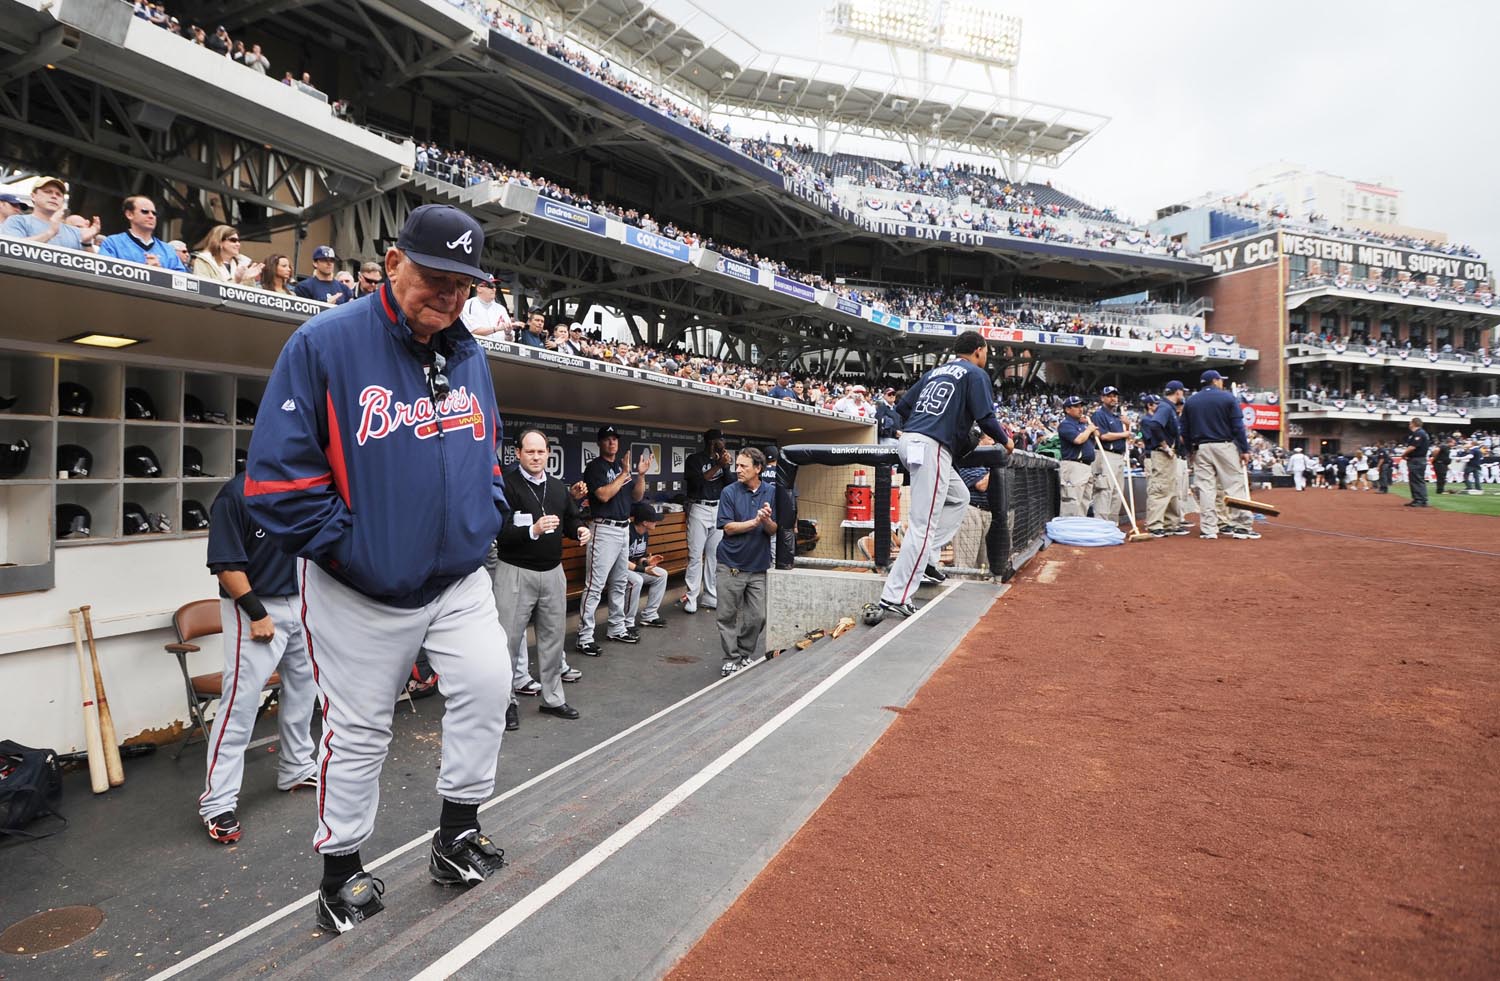 Atlanta Braves manager Bobby Cox walks up the steps from the dugout    freelance photojournalist